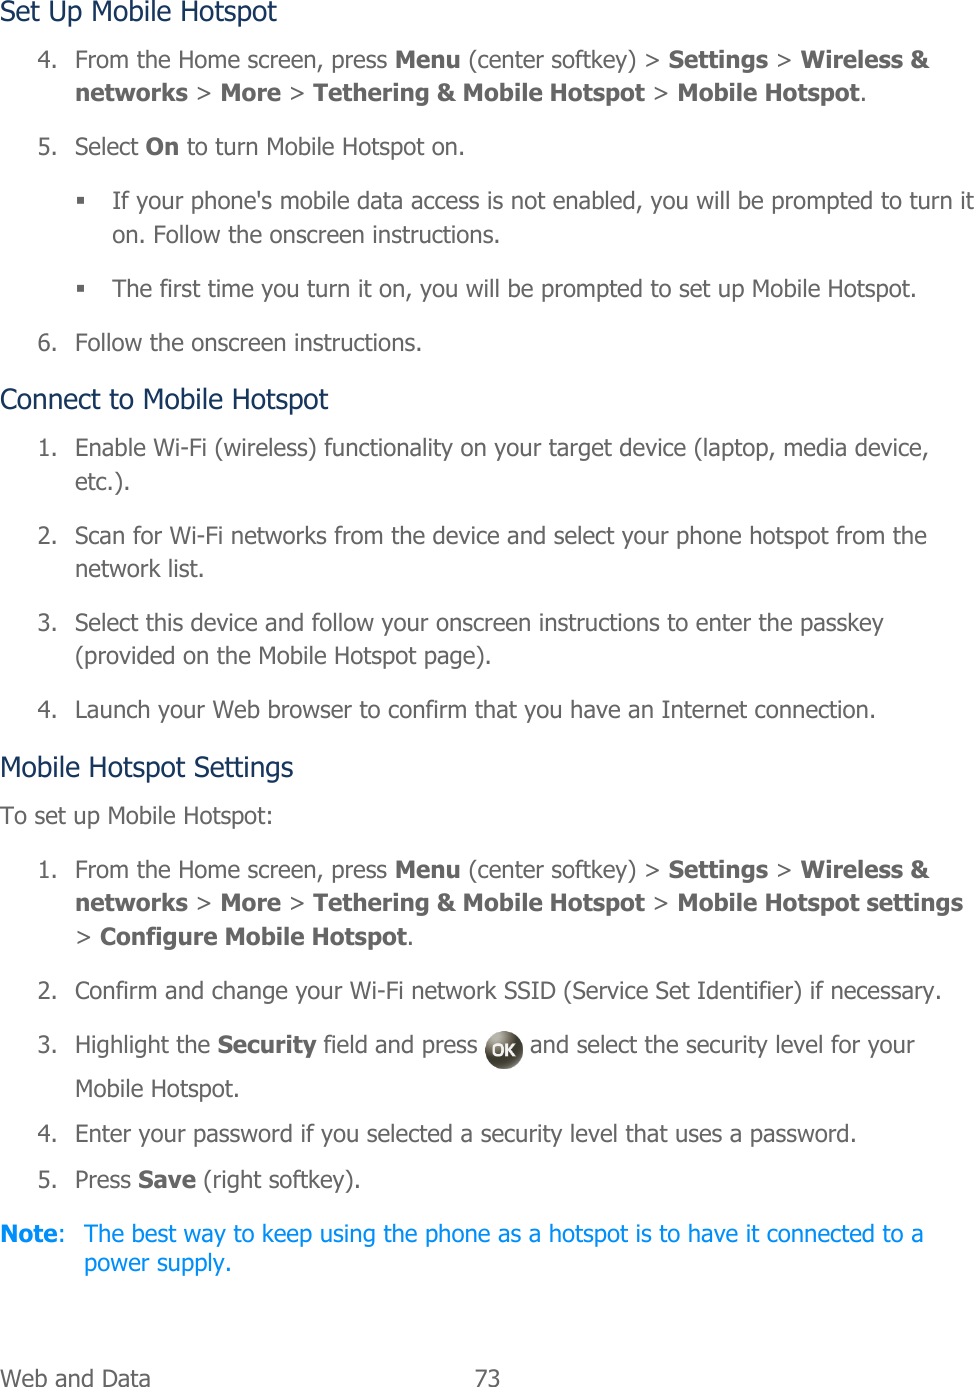  Web and Data   73   Set Up Mobile Hotspot 4. From the Home screen, press Menu (center softkey) &gt; Settings &gt; Wireless &amp; networks &gt; More &gt; Tethering &amp; Mobile Hotspot &gt; Mobile Hotspot.  5. Select On to turn Mobile Hotspot on.  If your phone&apos;s mobile data access is not enabled, you will be prompted to turn it on. Follow the onscreen instructions.  The first time you turn it on, you will be prompted to set up Mobile Hotspot. 6. Follow the onscreen instructions. Connect to Mobile Hotspot 1. Enable Wi-Fi (wireless) functionality on your target device (laptop, media device, etc.).  2. Scan for Wi-Fi networks from the device and select your phone hotspot from the network list. 3. Select this device and follow your onscreen instructions to enter the passkey (provided on the Mobile Hotspot page). 4. Launch your Web browser to confirm that you have an Internet connection. Mobile Hotspot Settings To set up Mobile Hotspot: 1. From the Home screen, press Menu (center softkey) &gt; Settings &gt; Wireless &amp; networks &gt; More &gt; Tethering &amp; Mobile Hotspot &gt; Mobile Hotspot settings &gt; Configure Mobile Hotspot.  2. Confirm and change your Wi-Fi network SSID (Service Set Identifier) if necessary. 3. Highlight the Security field and press   and select the security level for your Mobile Hotspot. 4. Enter your password if you selected a security level that uses a password. 5. Press Save (right softkey). Note:  The best way to keep using the phone as a hotspot is to have it connected to a power supply. 